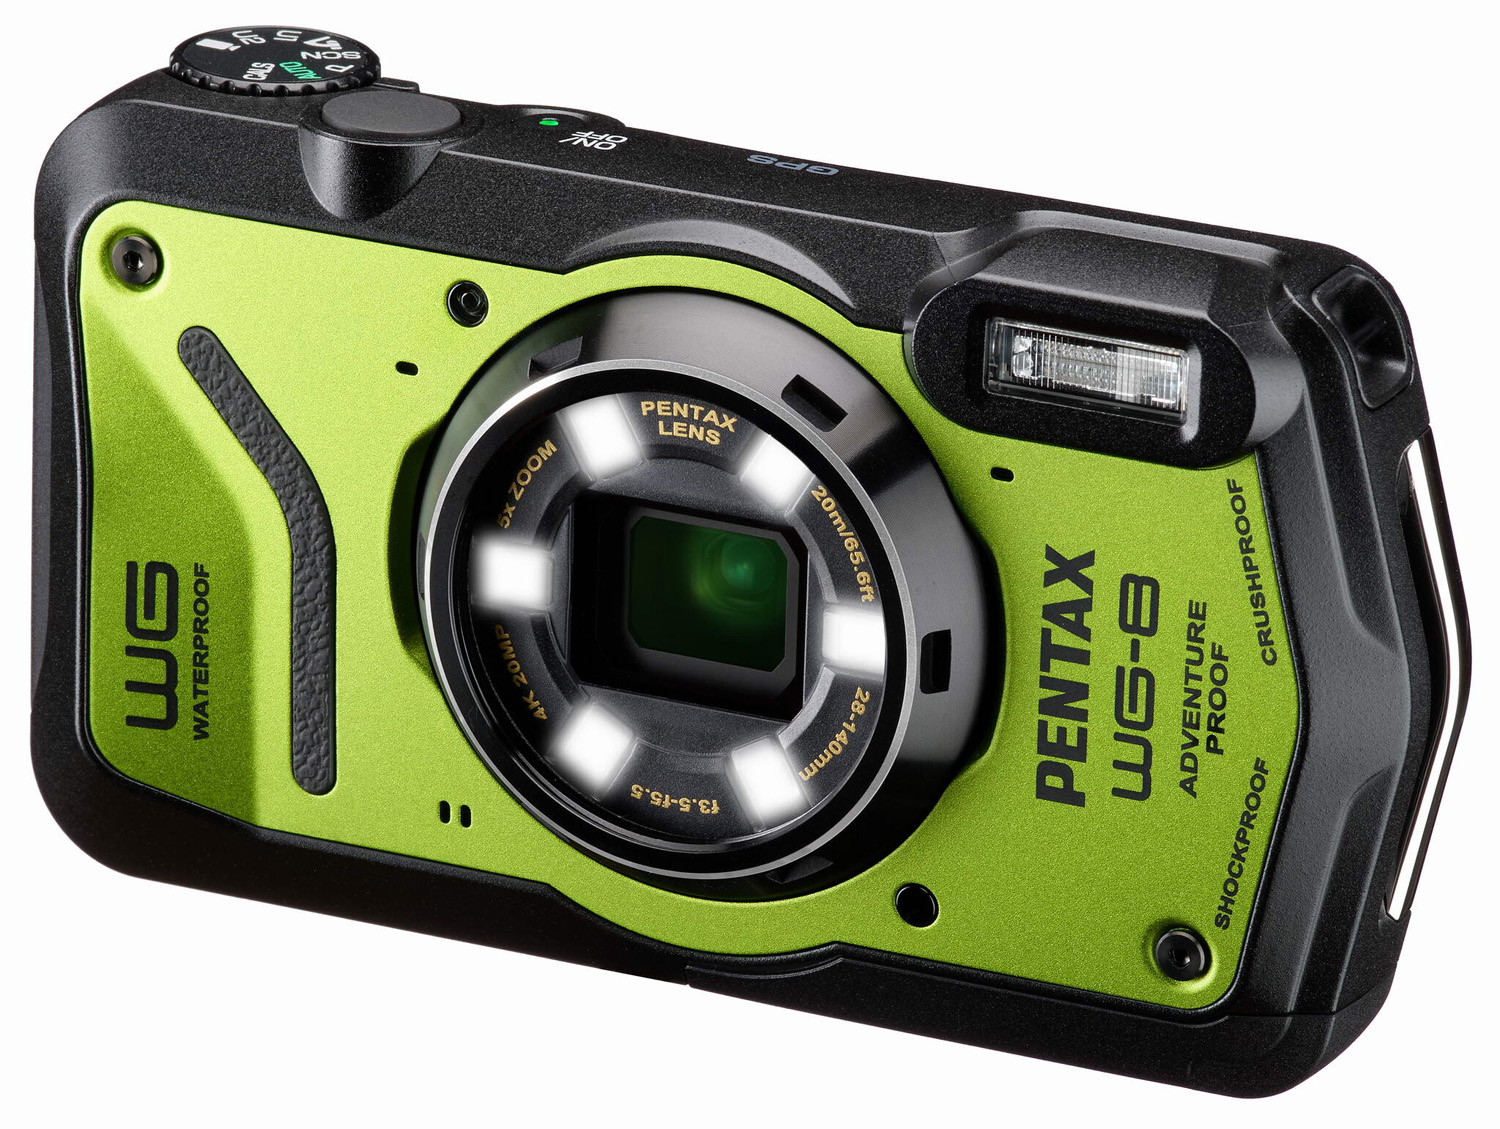 Product photo of Pentax WG-8 waterproof camera on white background